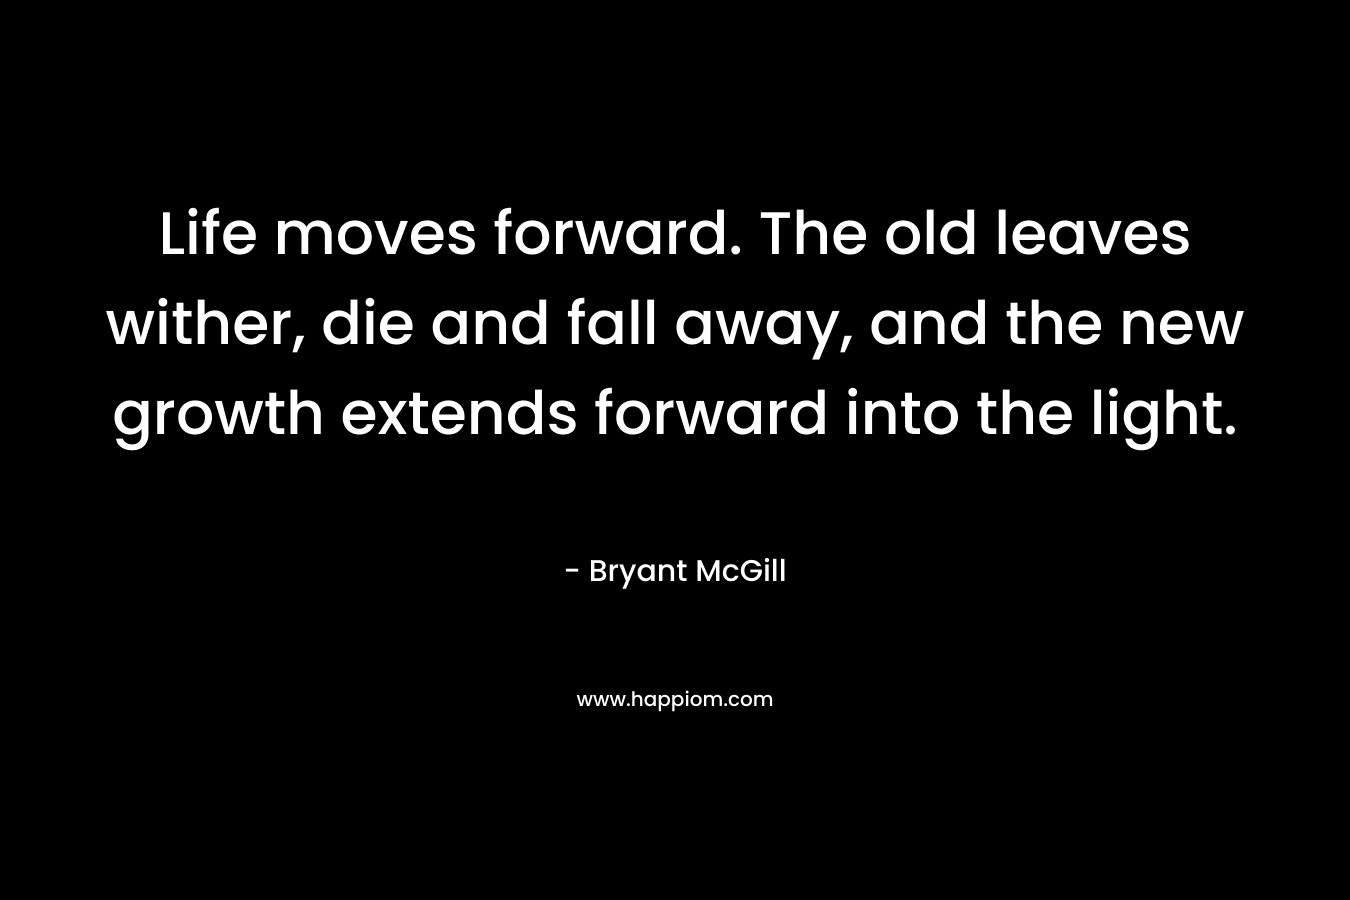 Life moves forward. The old leaves wither, die and fall away, and the new growth extends forward into the light. – Bryant McGill